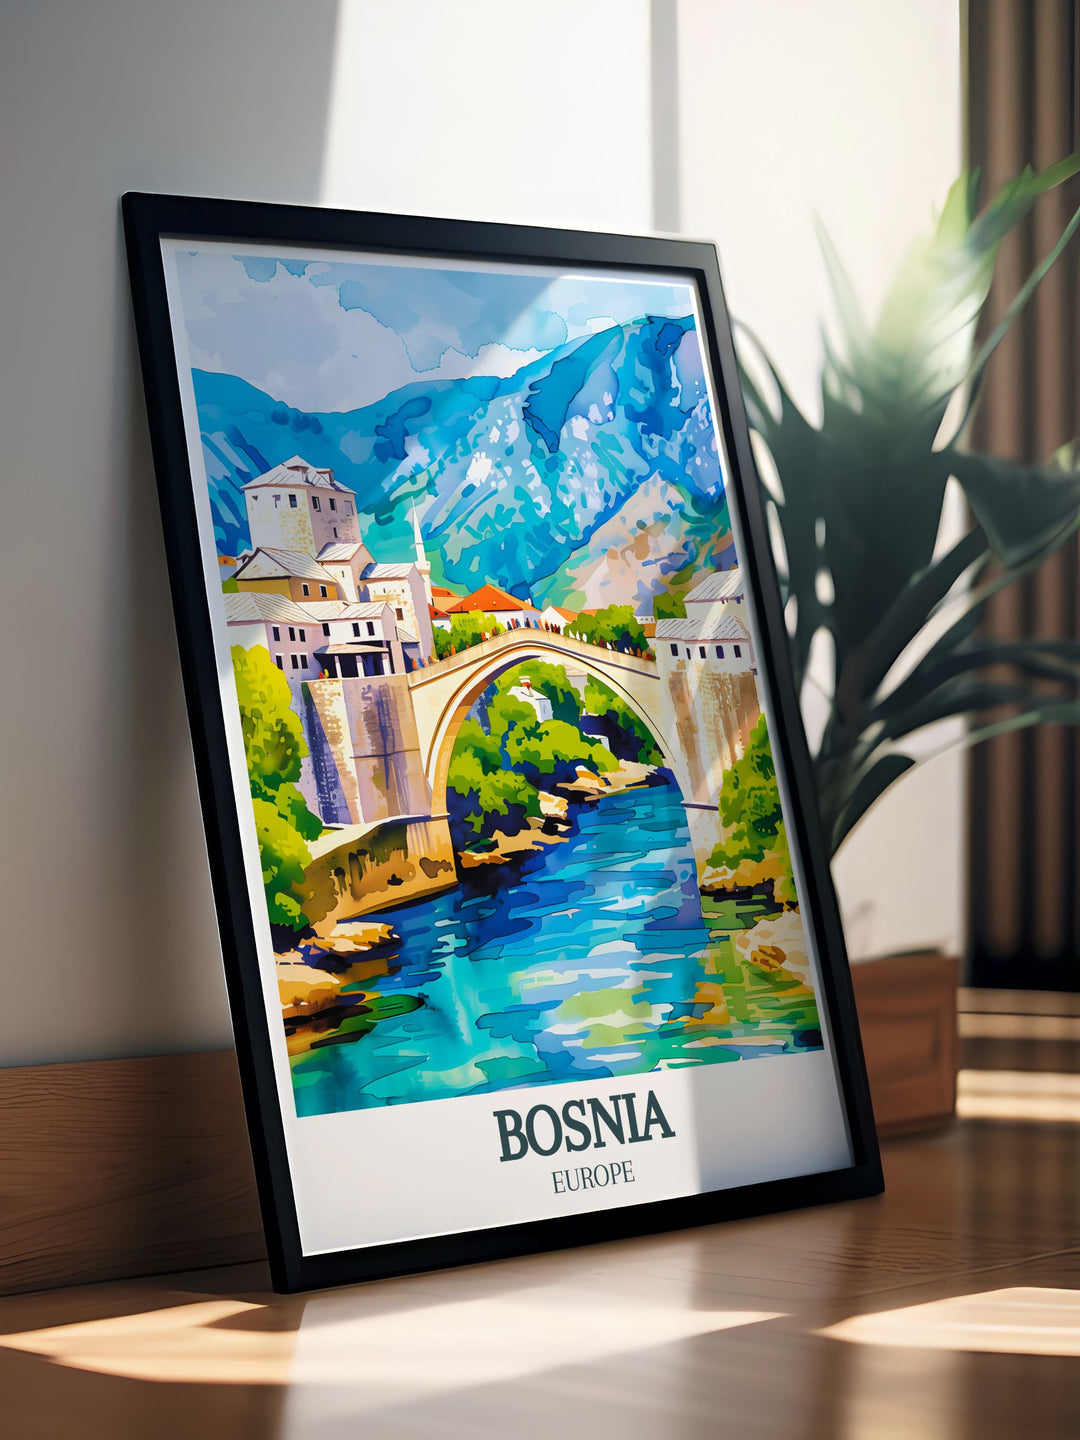 Mostar, Stari Most bridge in a captivating Bosnia Painting. This Travel Poster Print captures the essence of Bosnia Travel with intricate details of the historic bridge and cityscape. Perfect for adding a touch of history to your decor.